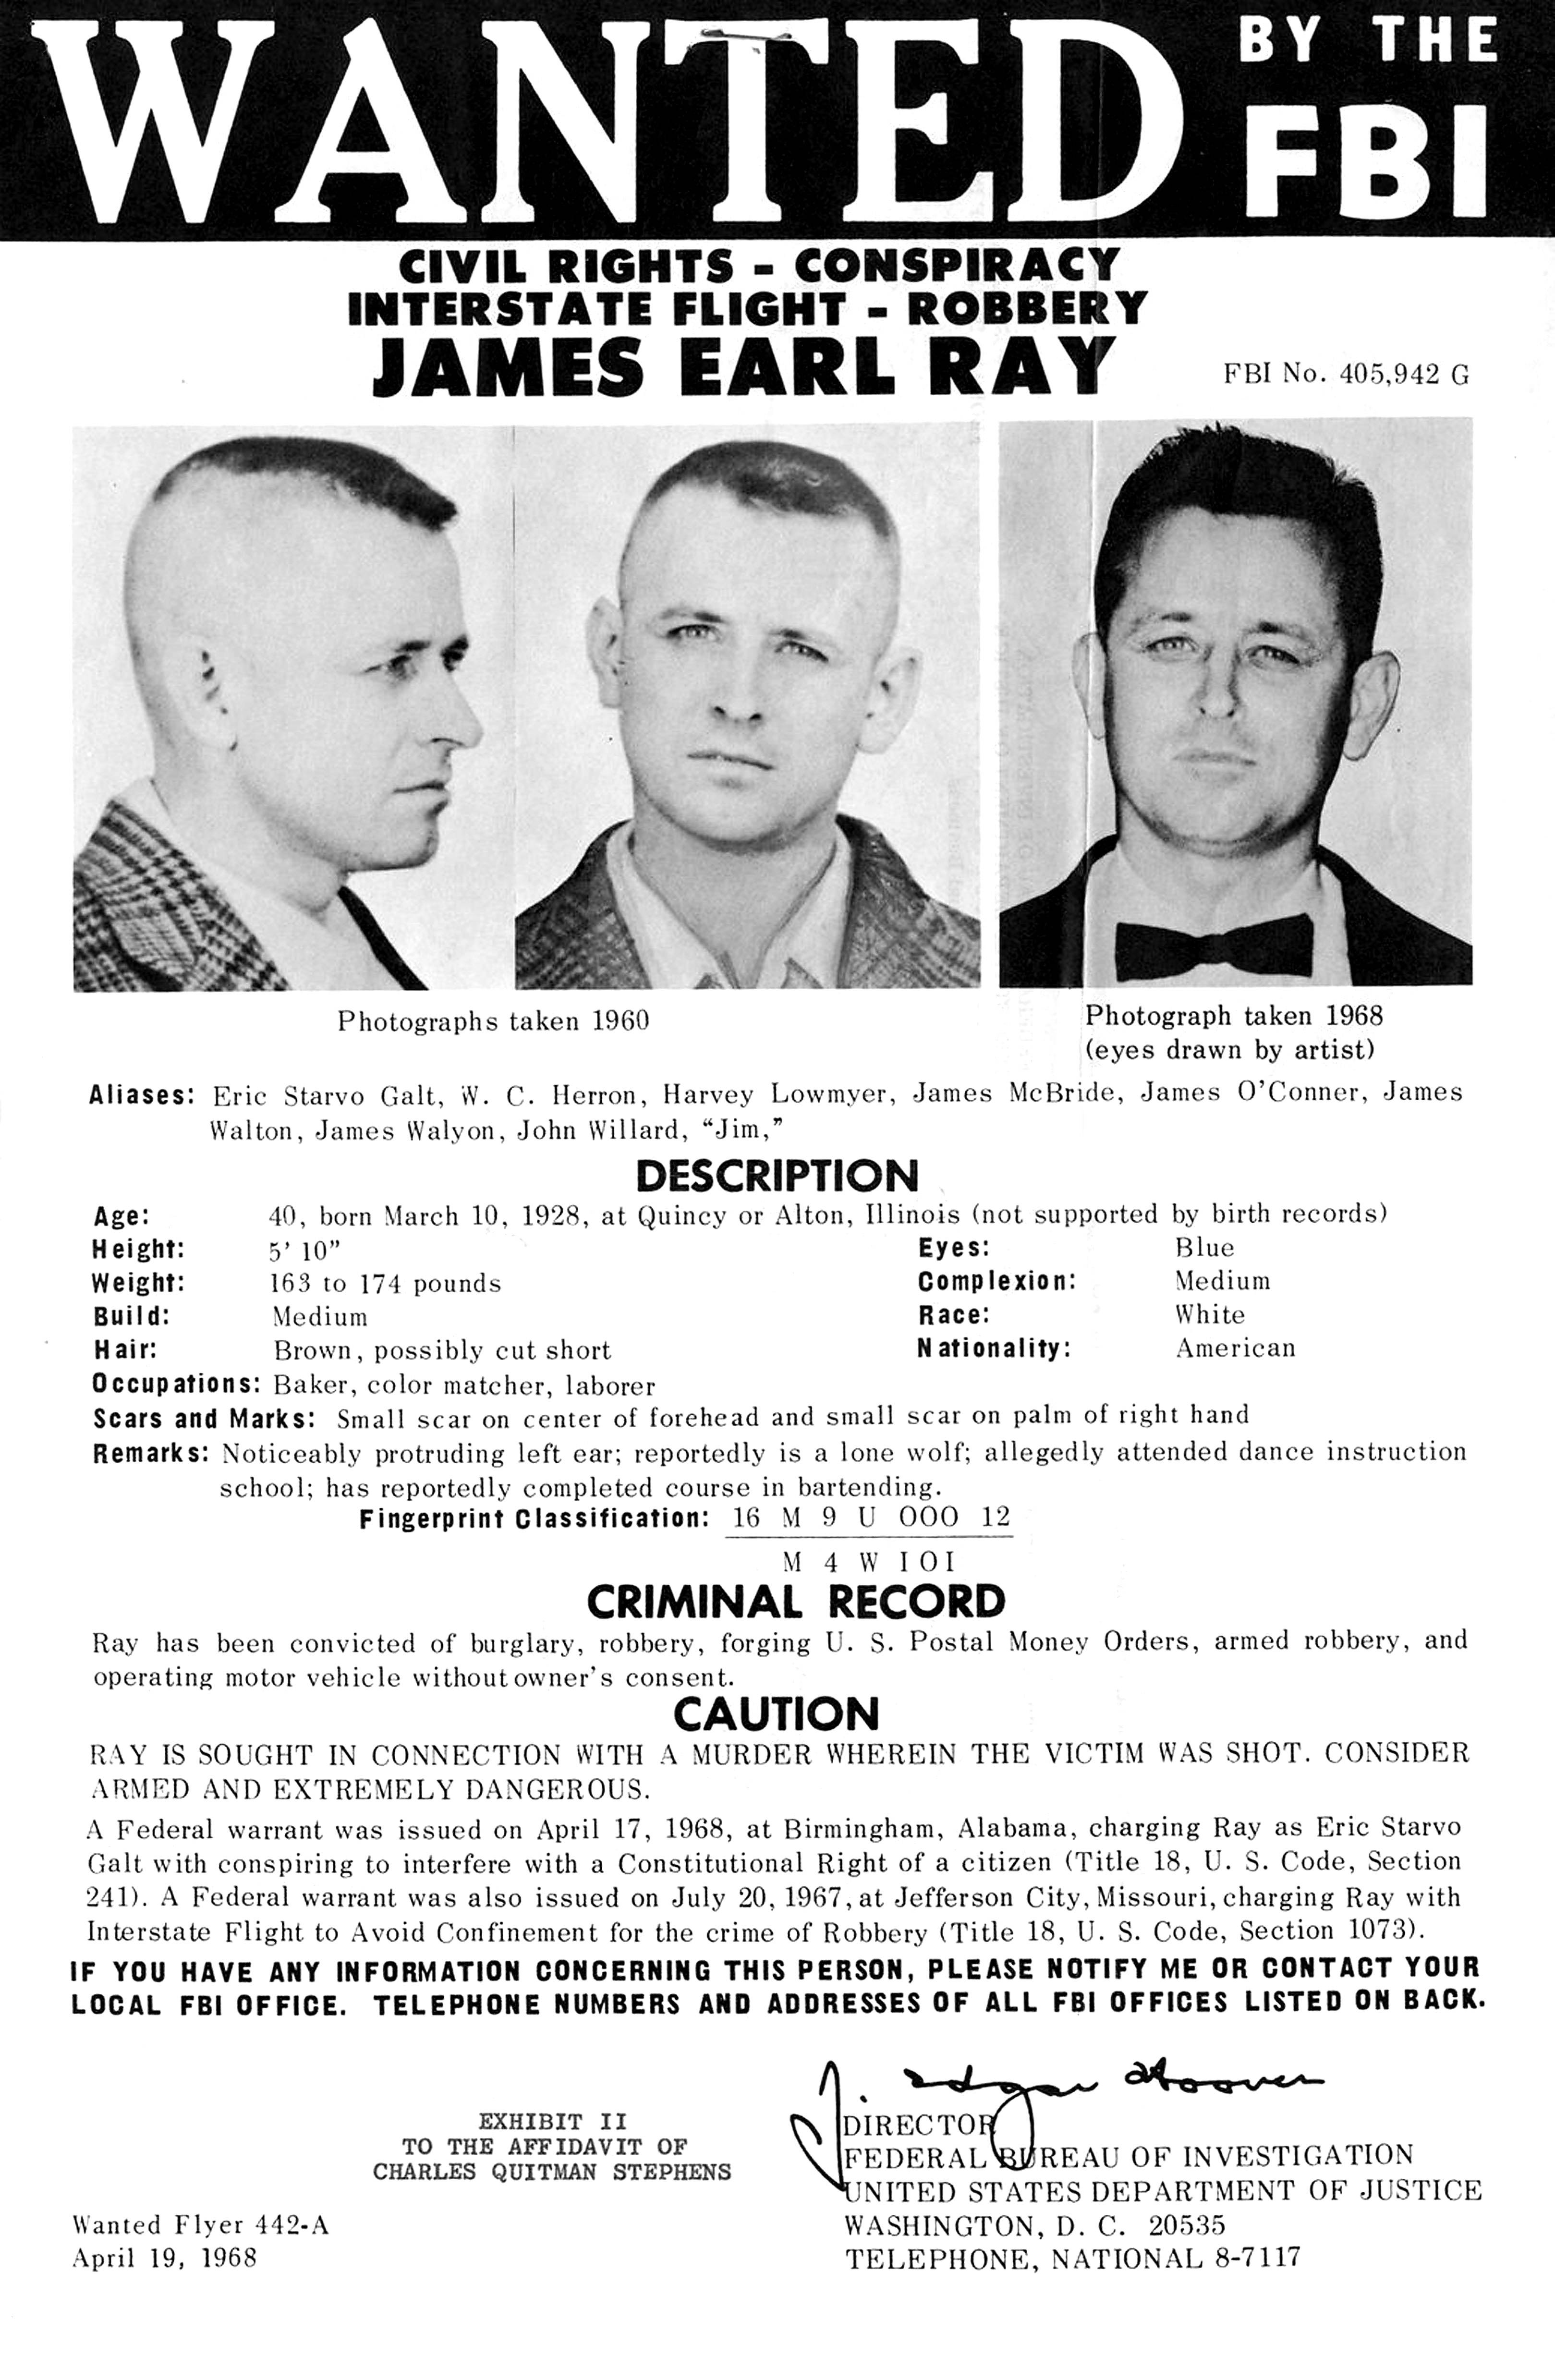 martin luther king jr assassination james earl ray